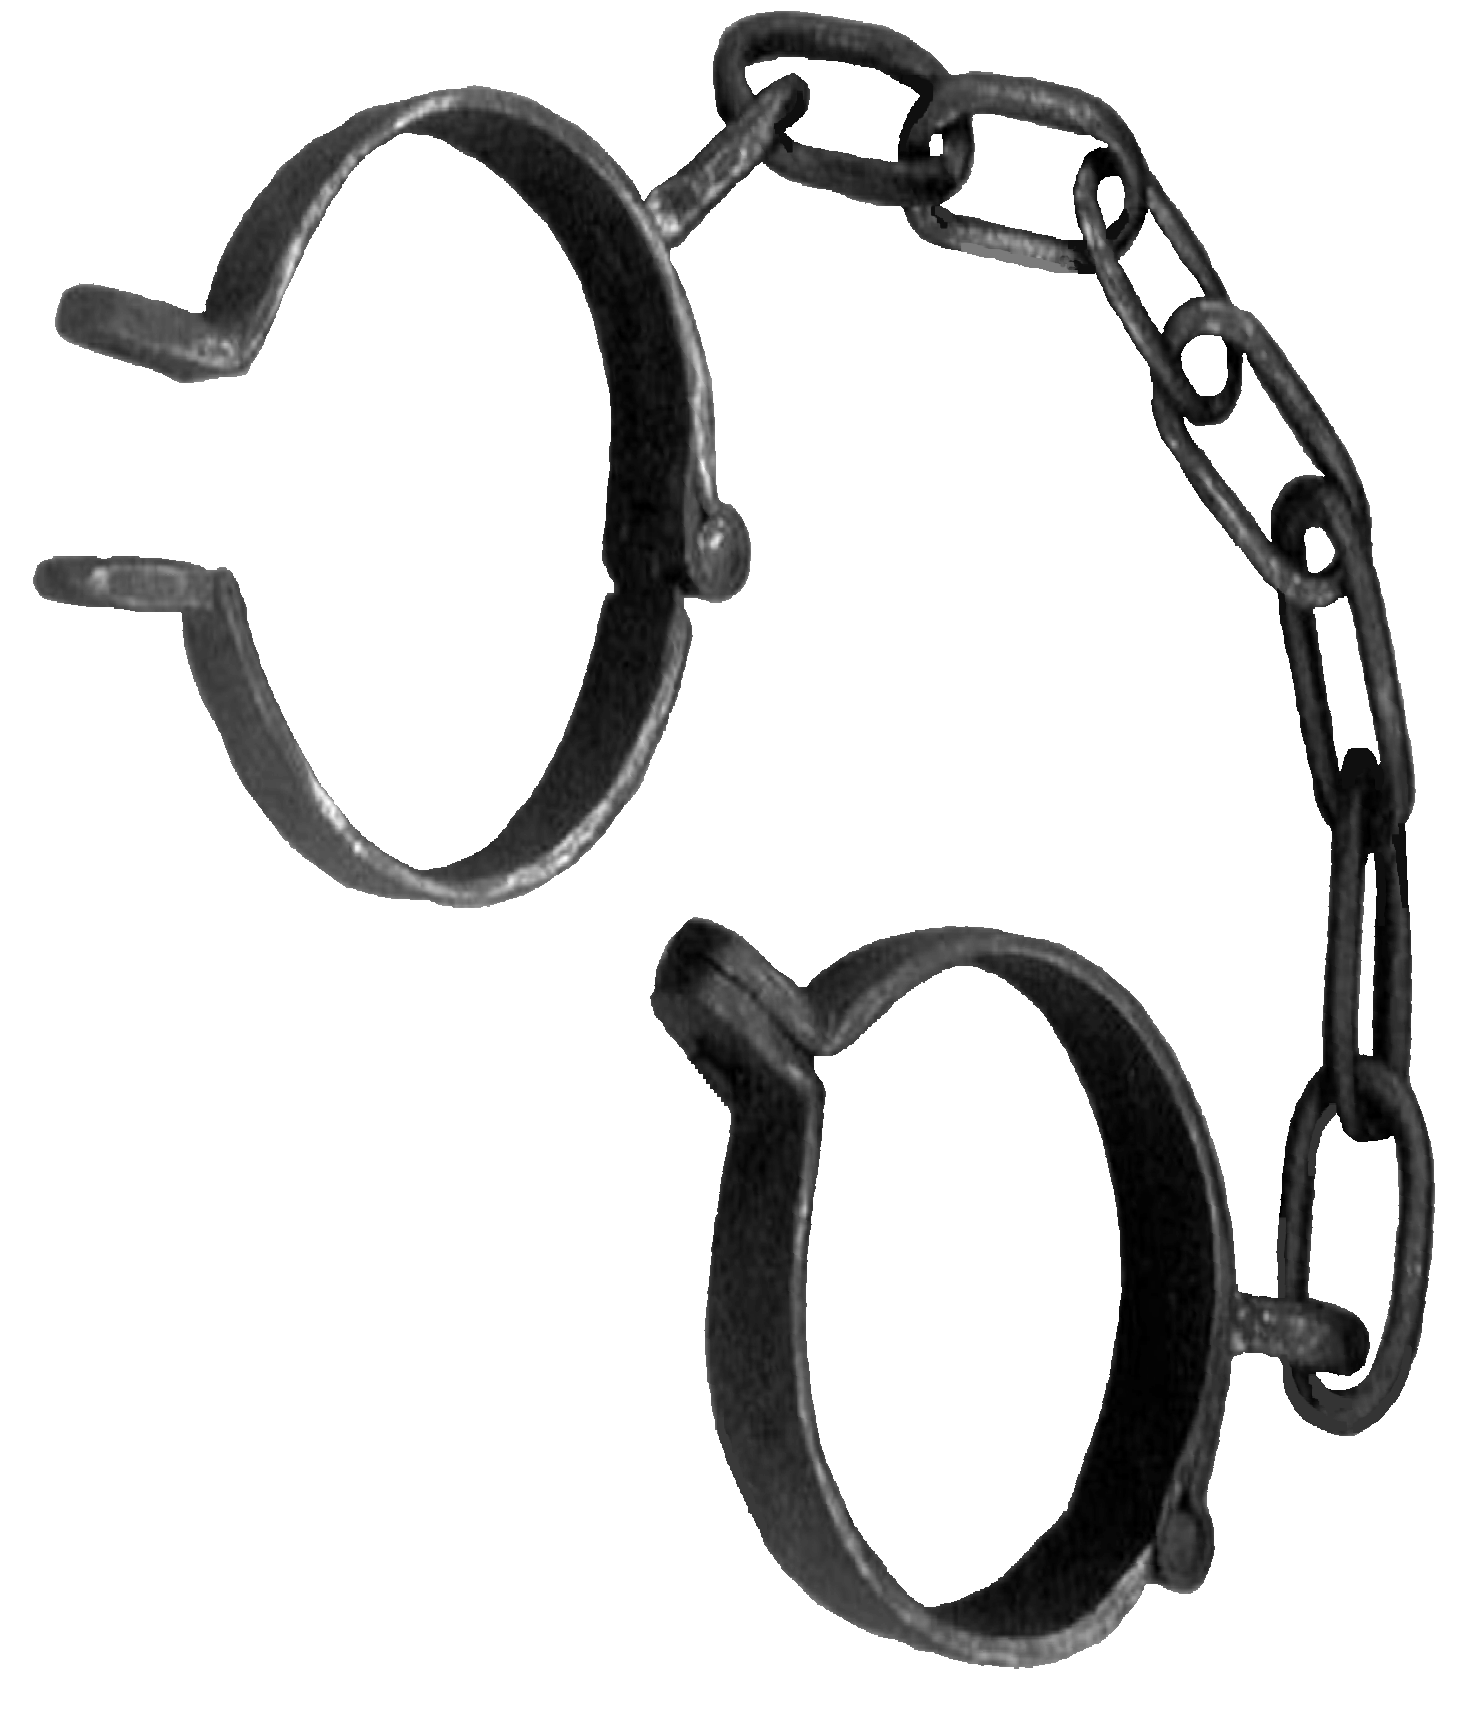 Page title . Slavery clipart handcuffs